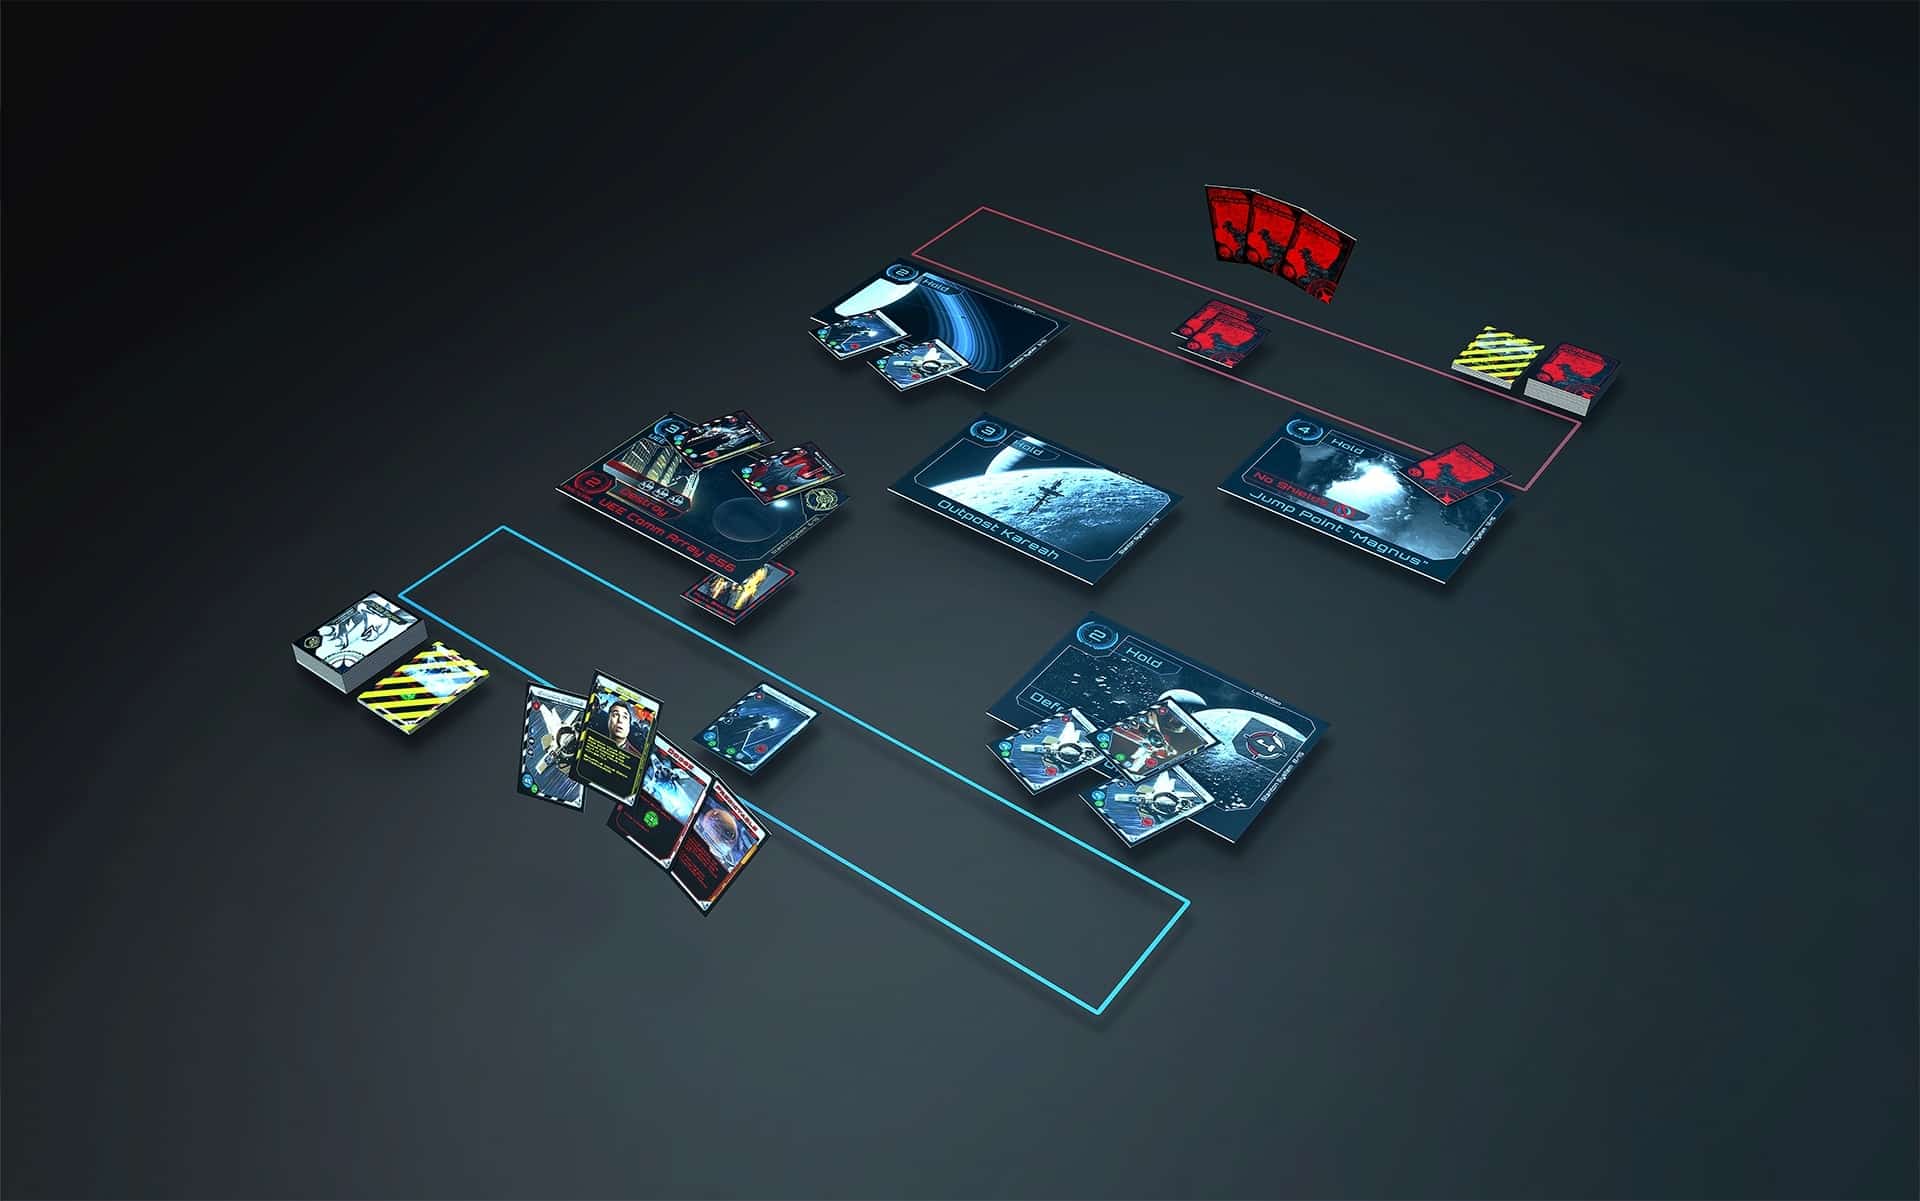 (This is roughly what the playing field at Squadrons looks like: In the middle are the five location cards that are fought over. Players place their spaceship and action cards, face down at first, then battle ensues with additional action cards).